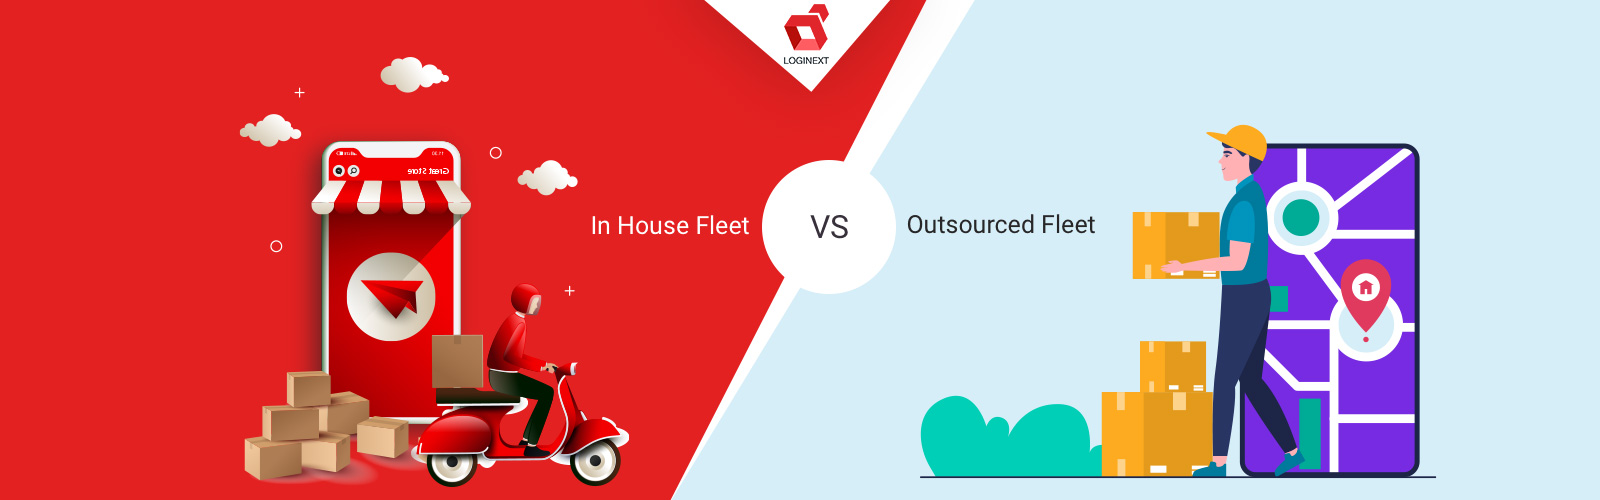 How to Handle last mile delivery? In House Fleet v/s Outsourced Fleet